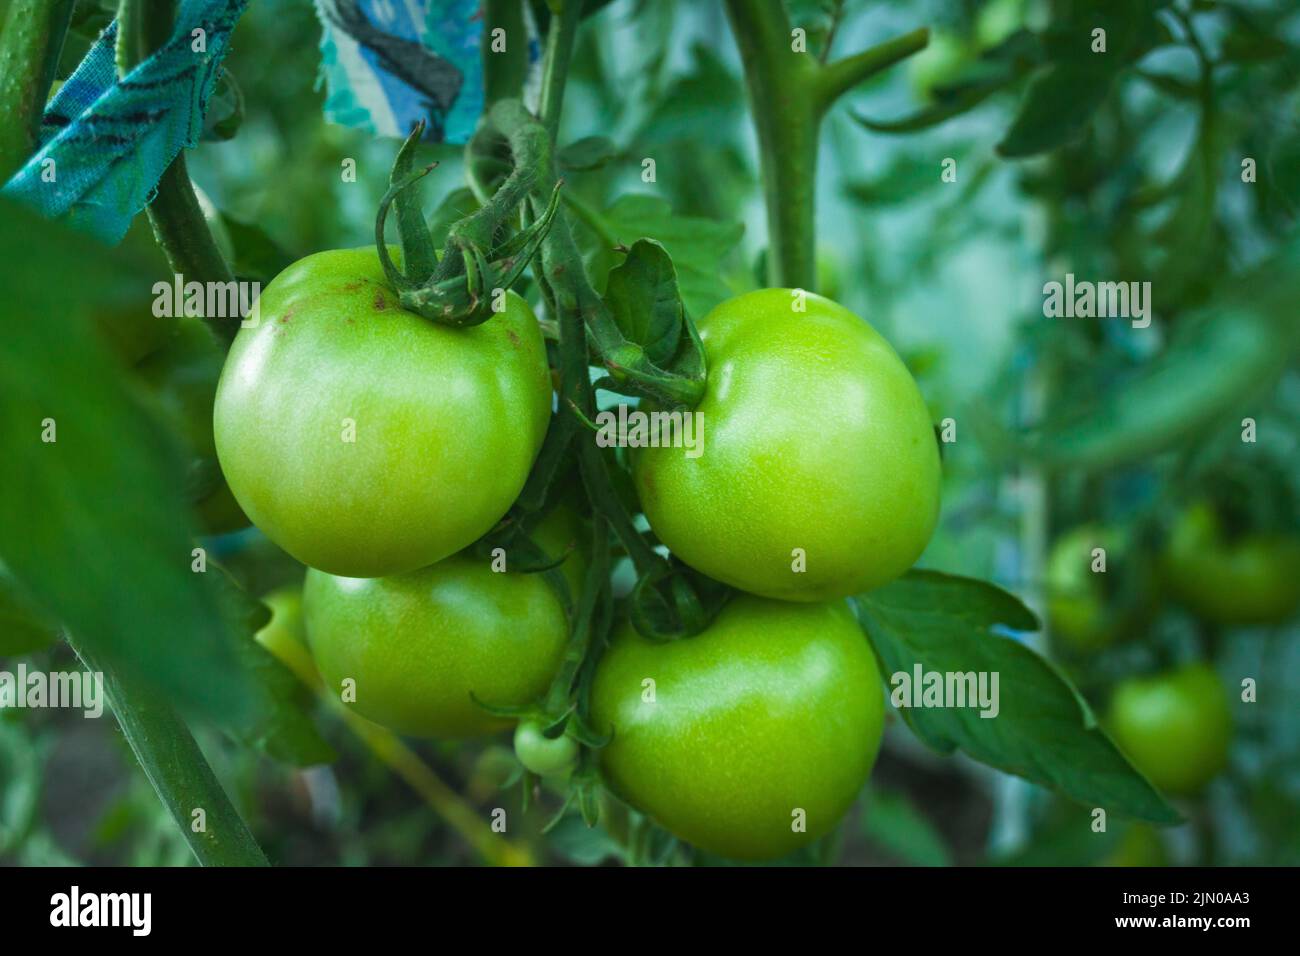 A bunch of green tomatoes hanging on the bush, summer garden view Stock Photo